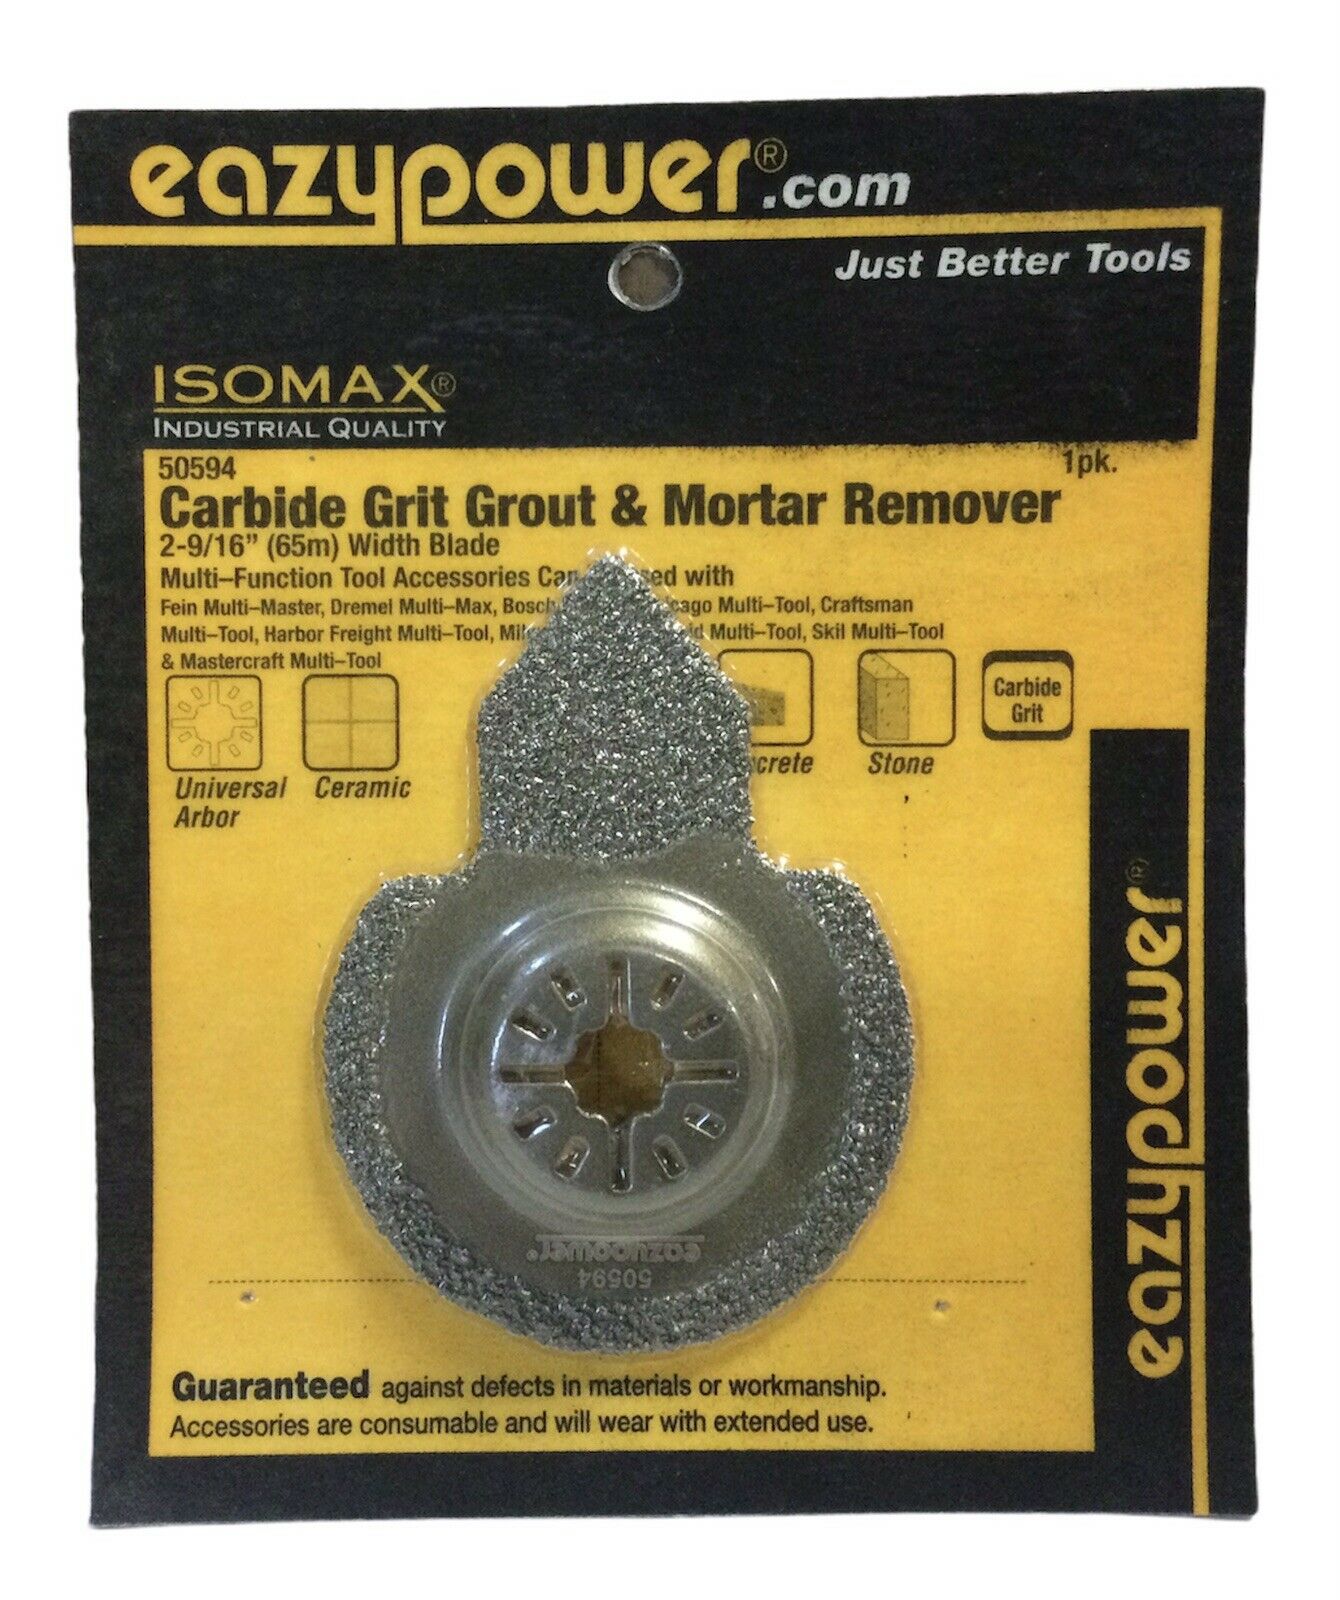 Eazypower Carbide Grit 2-9/16” Grout & Mortar Remover Blade 50594(3a)